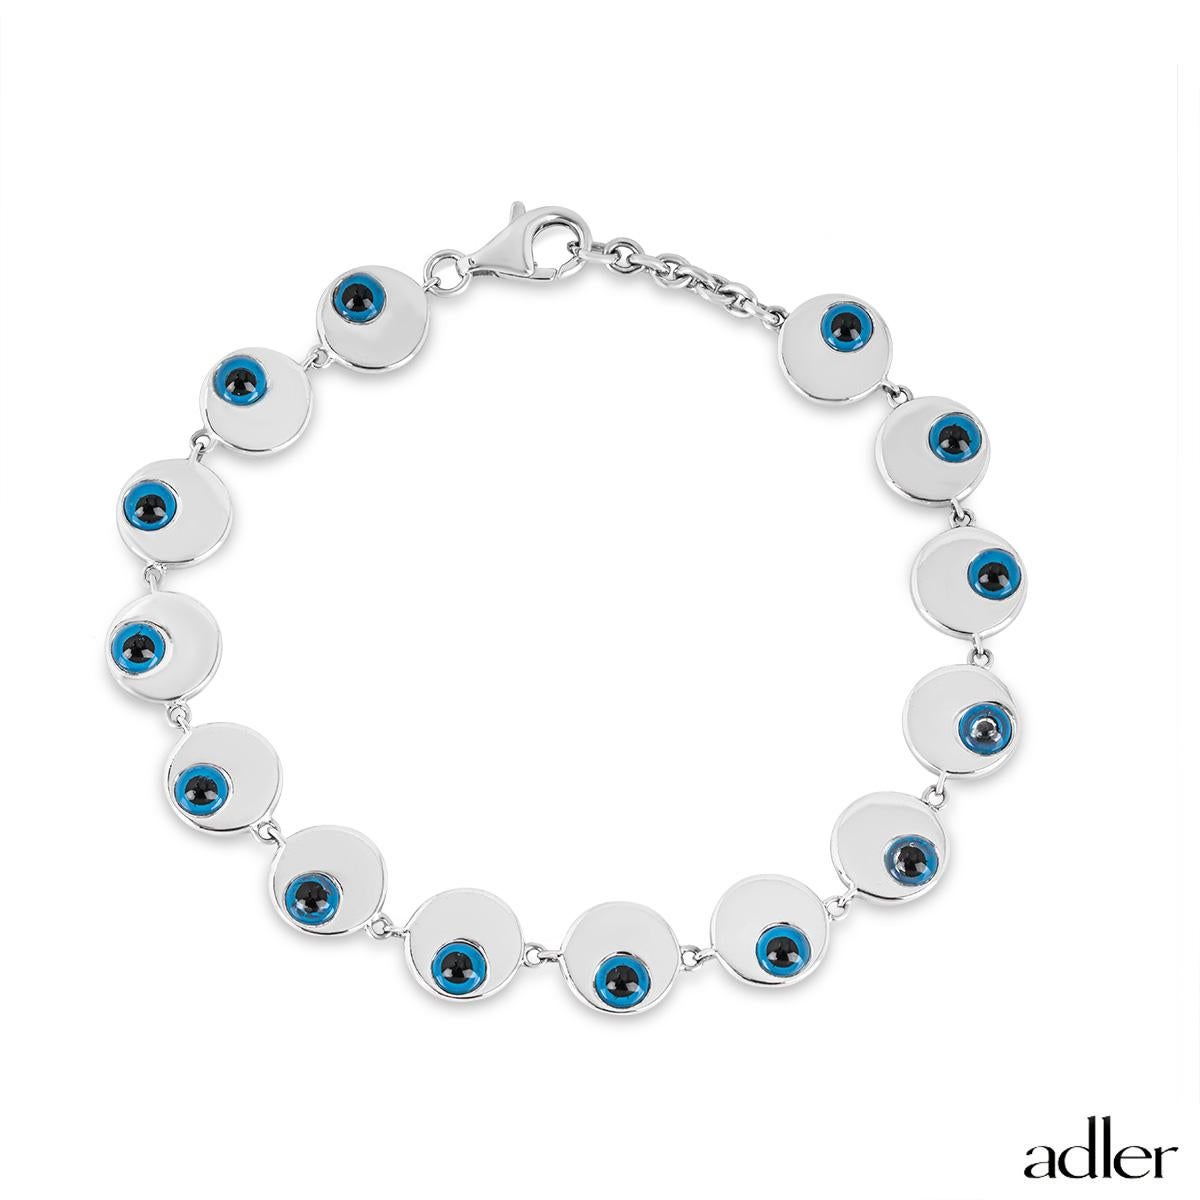 An 18k white gold enamel eye bracelet by Adler. The bracelet is composed of 14 circular motifs each set around the edge with a raised blue enamel eye. The bracelet measures 7 inches in length and features a classic lobster clasp with a gross weight